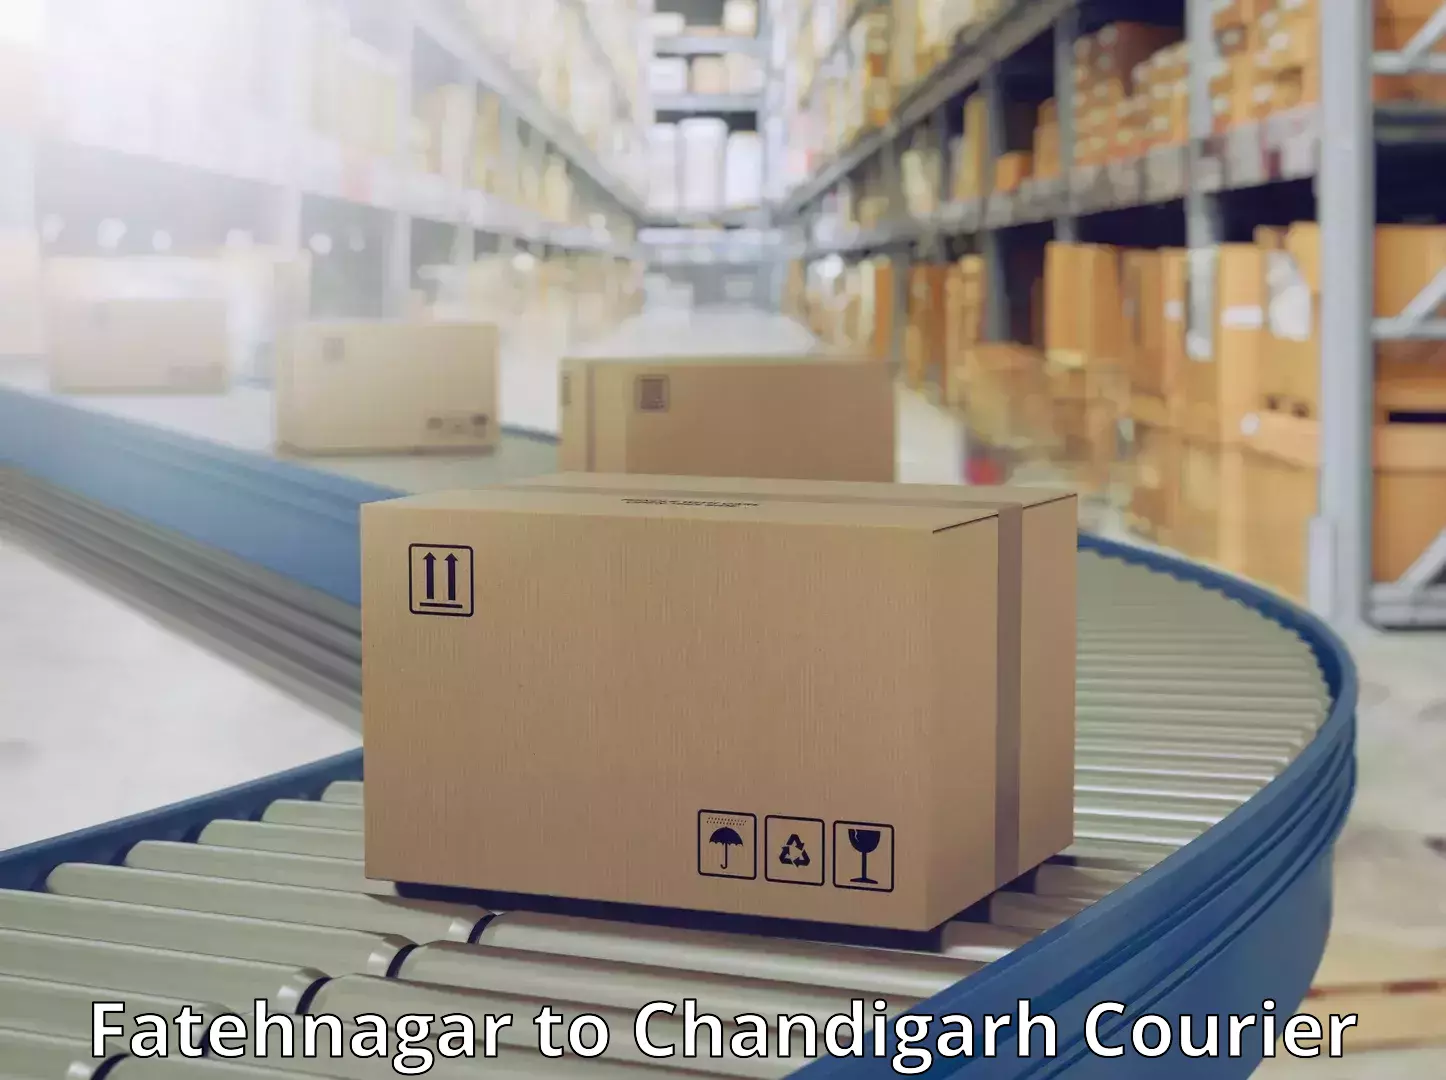 Full-service courier options in Fatehnagar to Chandigarh